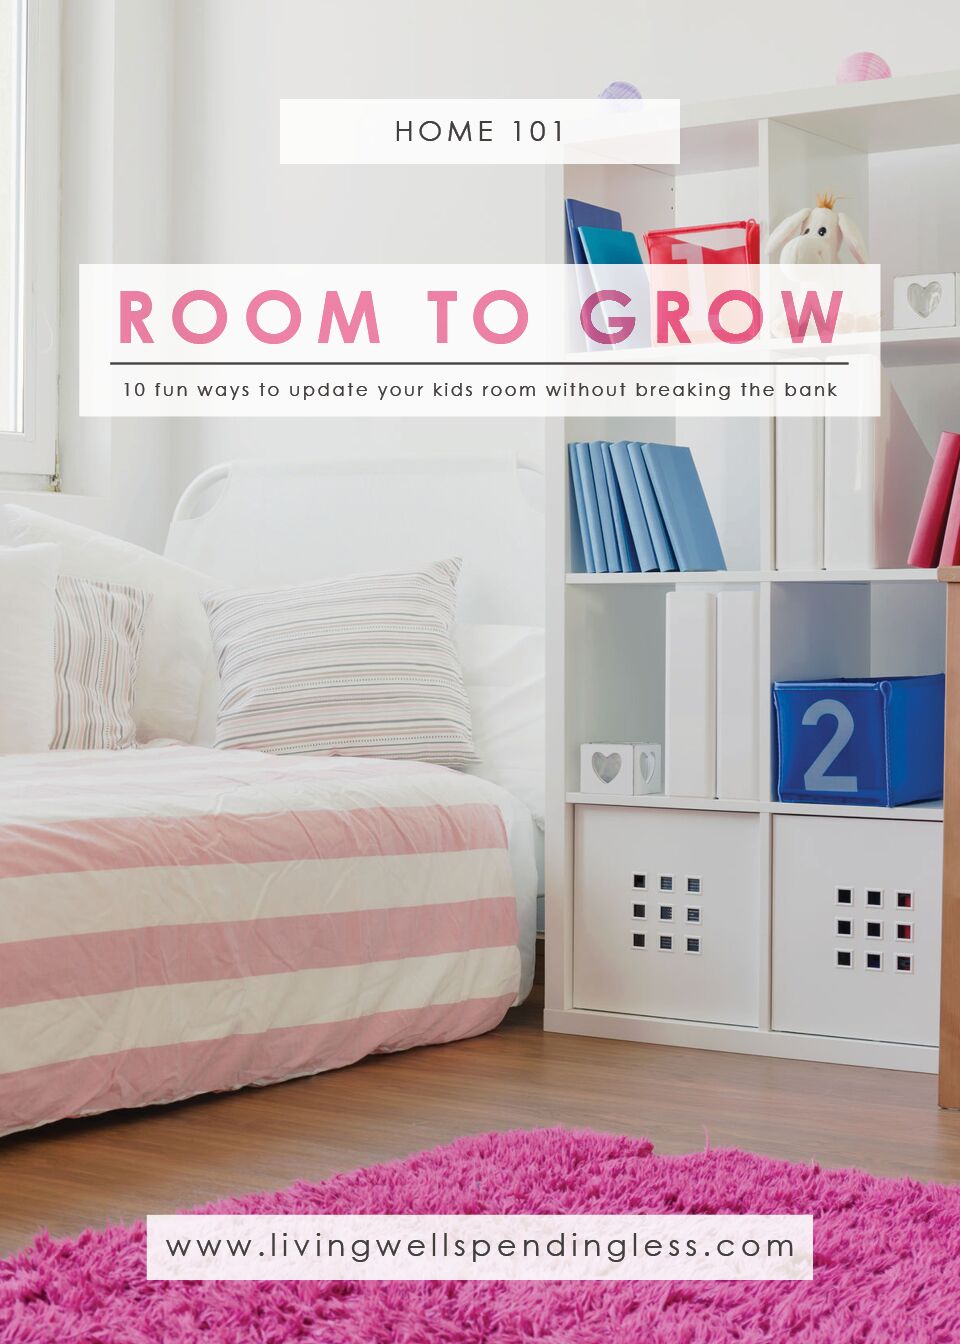 Decorating Tips | Kids Room Decorating Tips | Budget-Friendly Decorating | Home 101